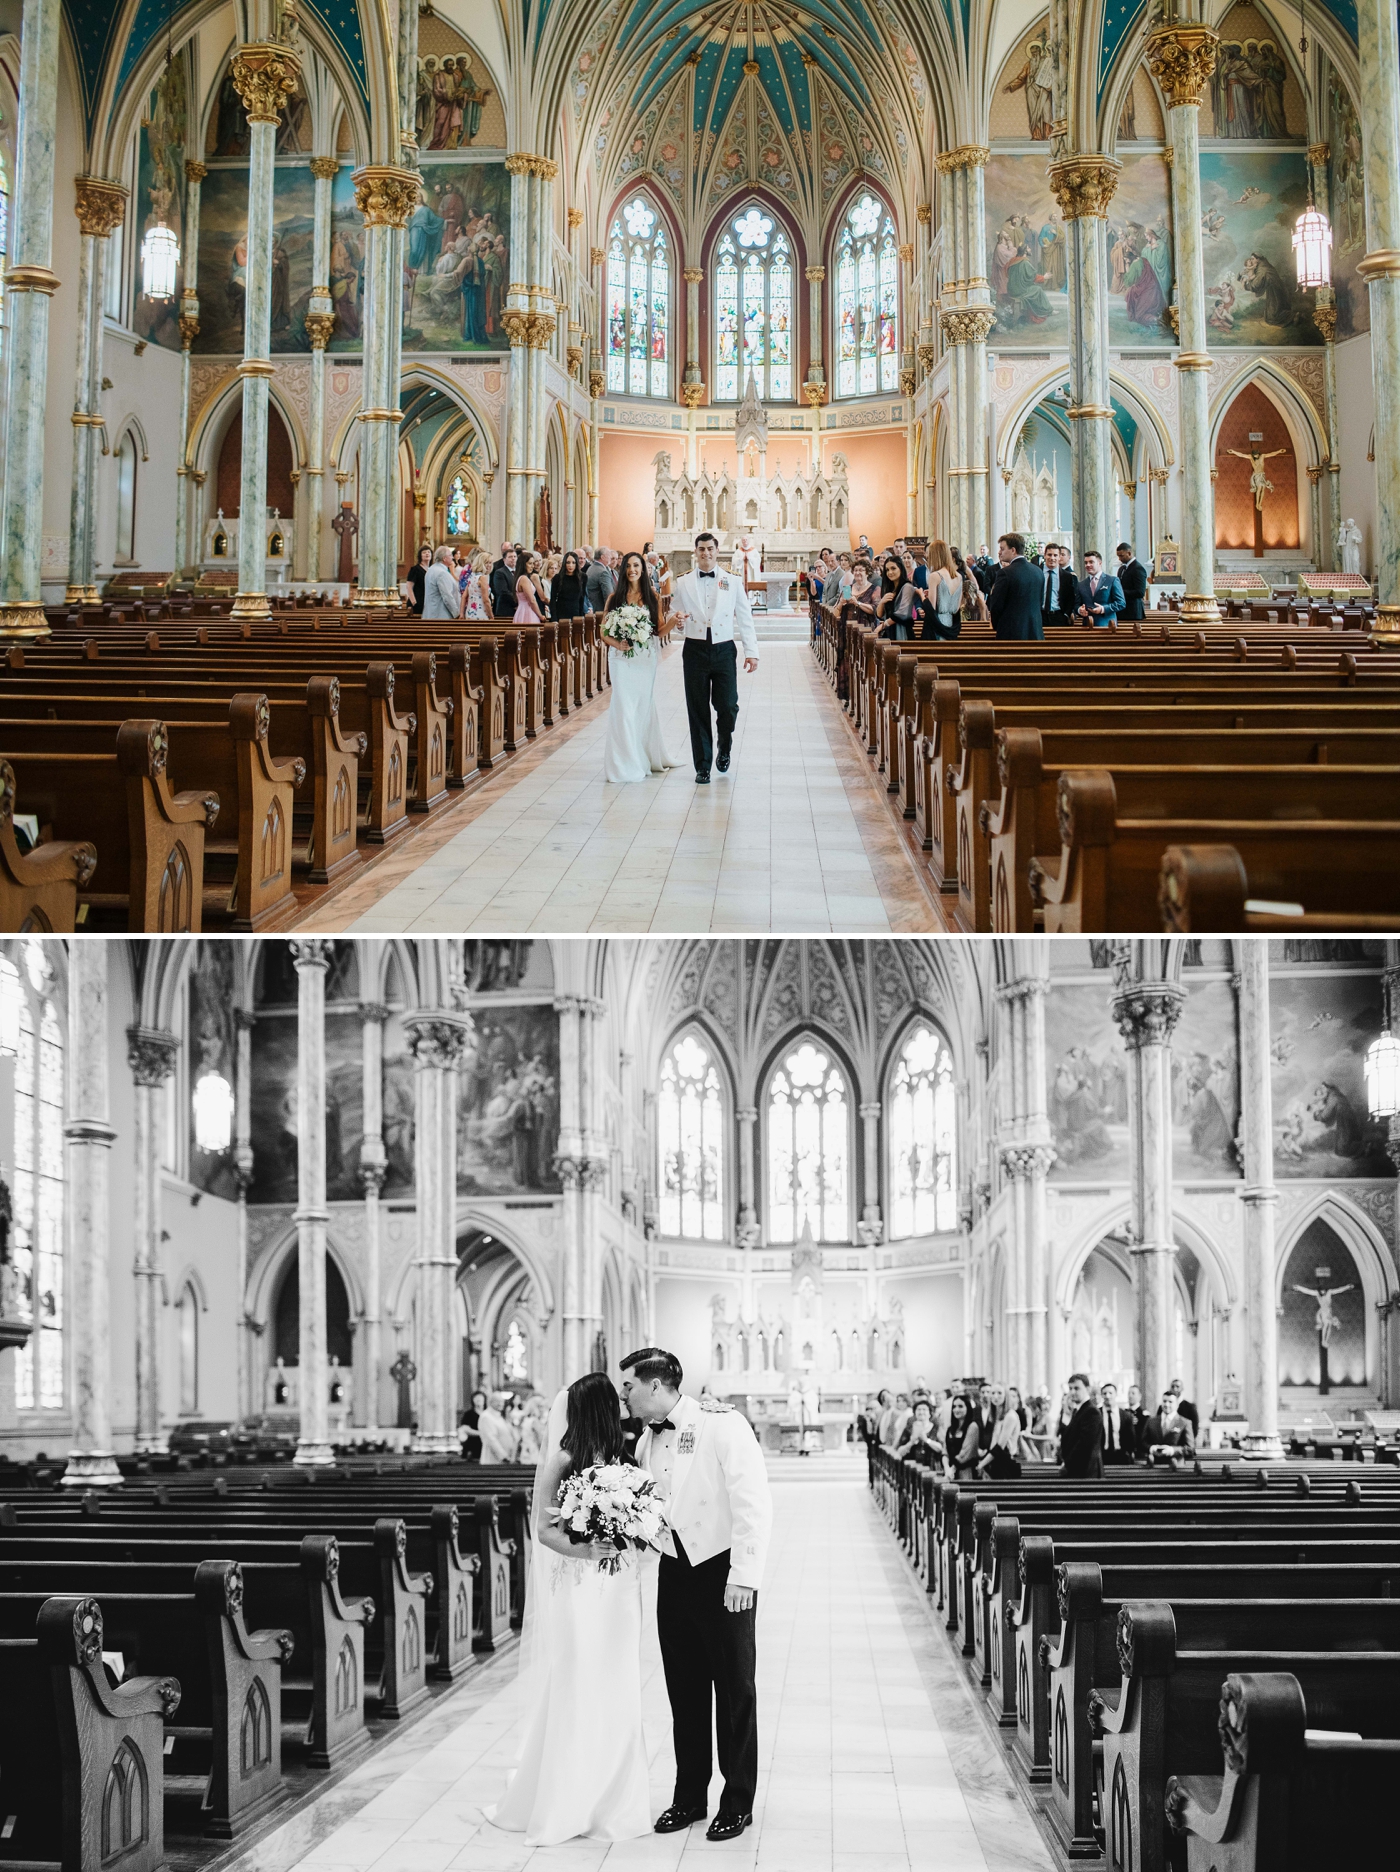 Wedding Ceremony at Cathedral of St. John the Baptist in Savannah